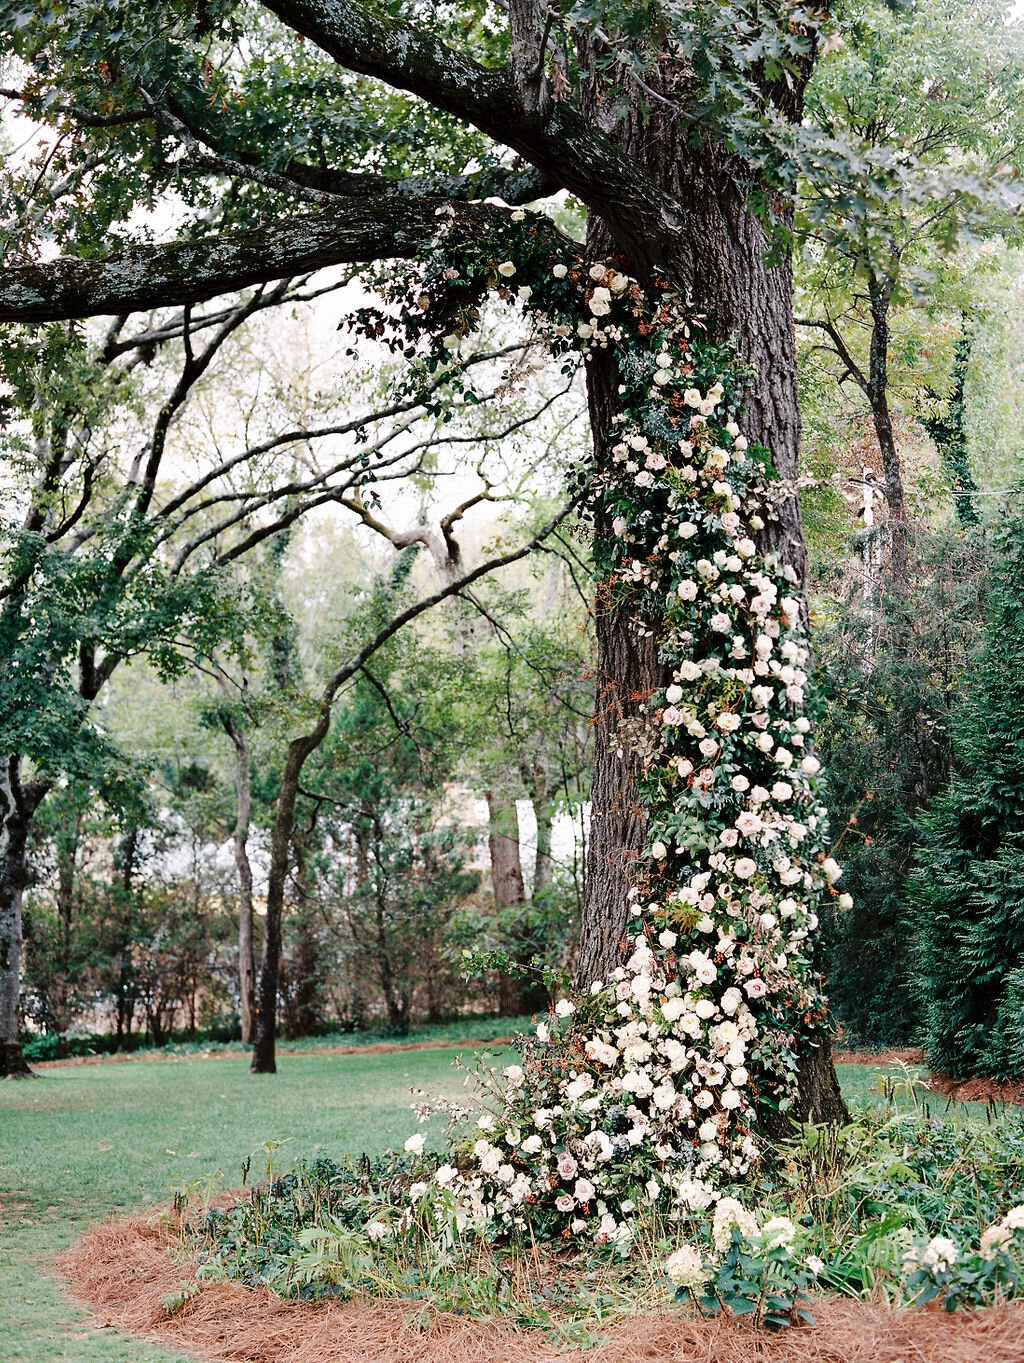 Lush floral installation on an old oak tree with natural vines and greenery with a profusion of white, ivory, and blush garden roses, dahlias, ranunculus, and wildflowers. Belle Meade, Nashville wedding floral design.